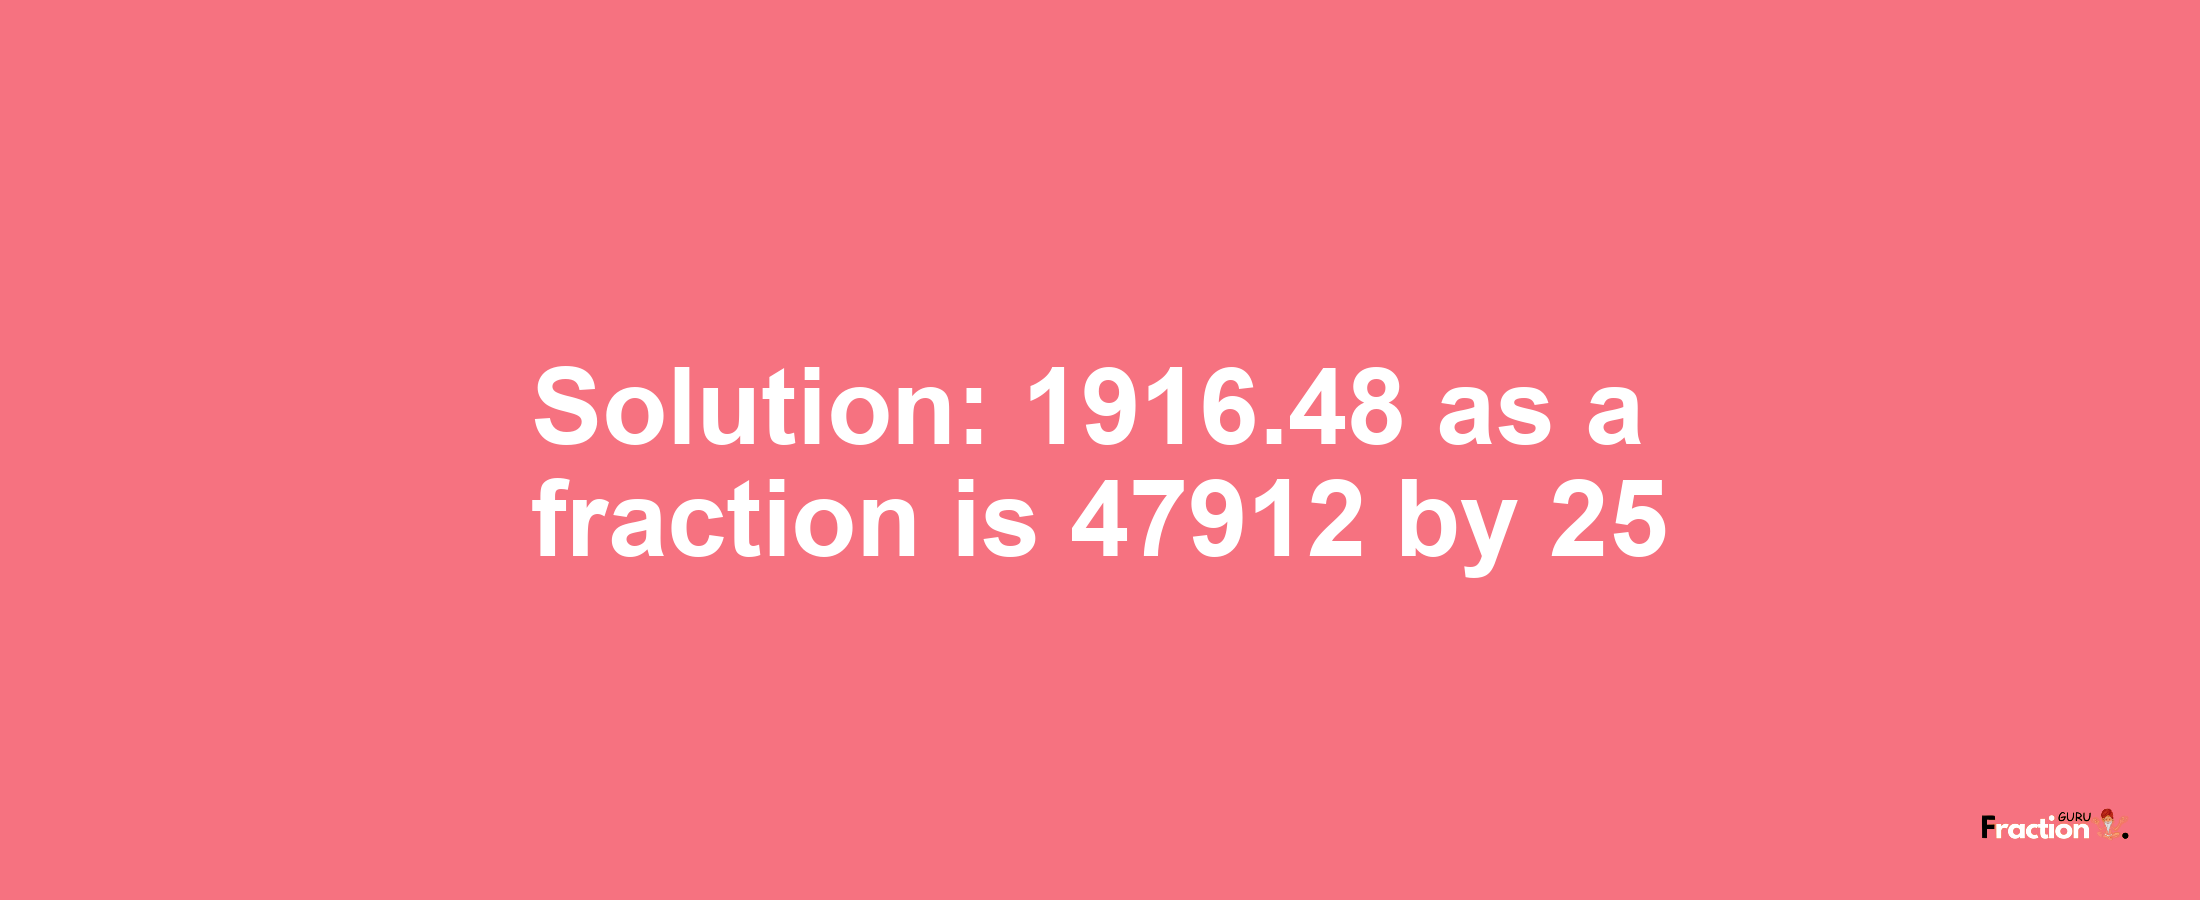 Solution:1916.48 as a fraction is 47912/25